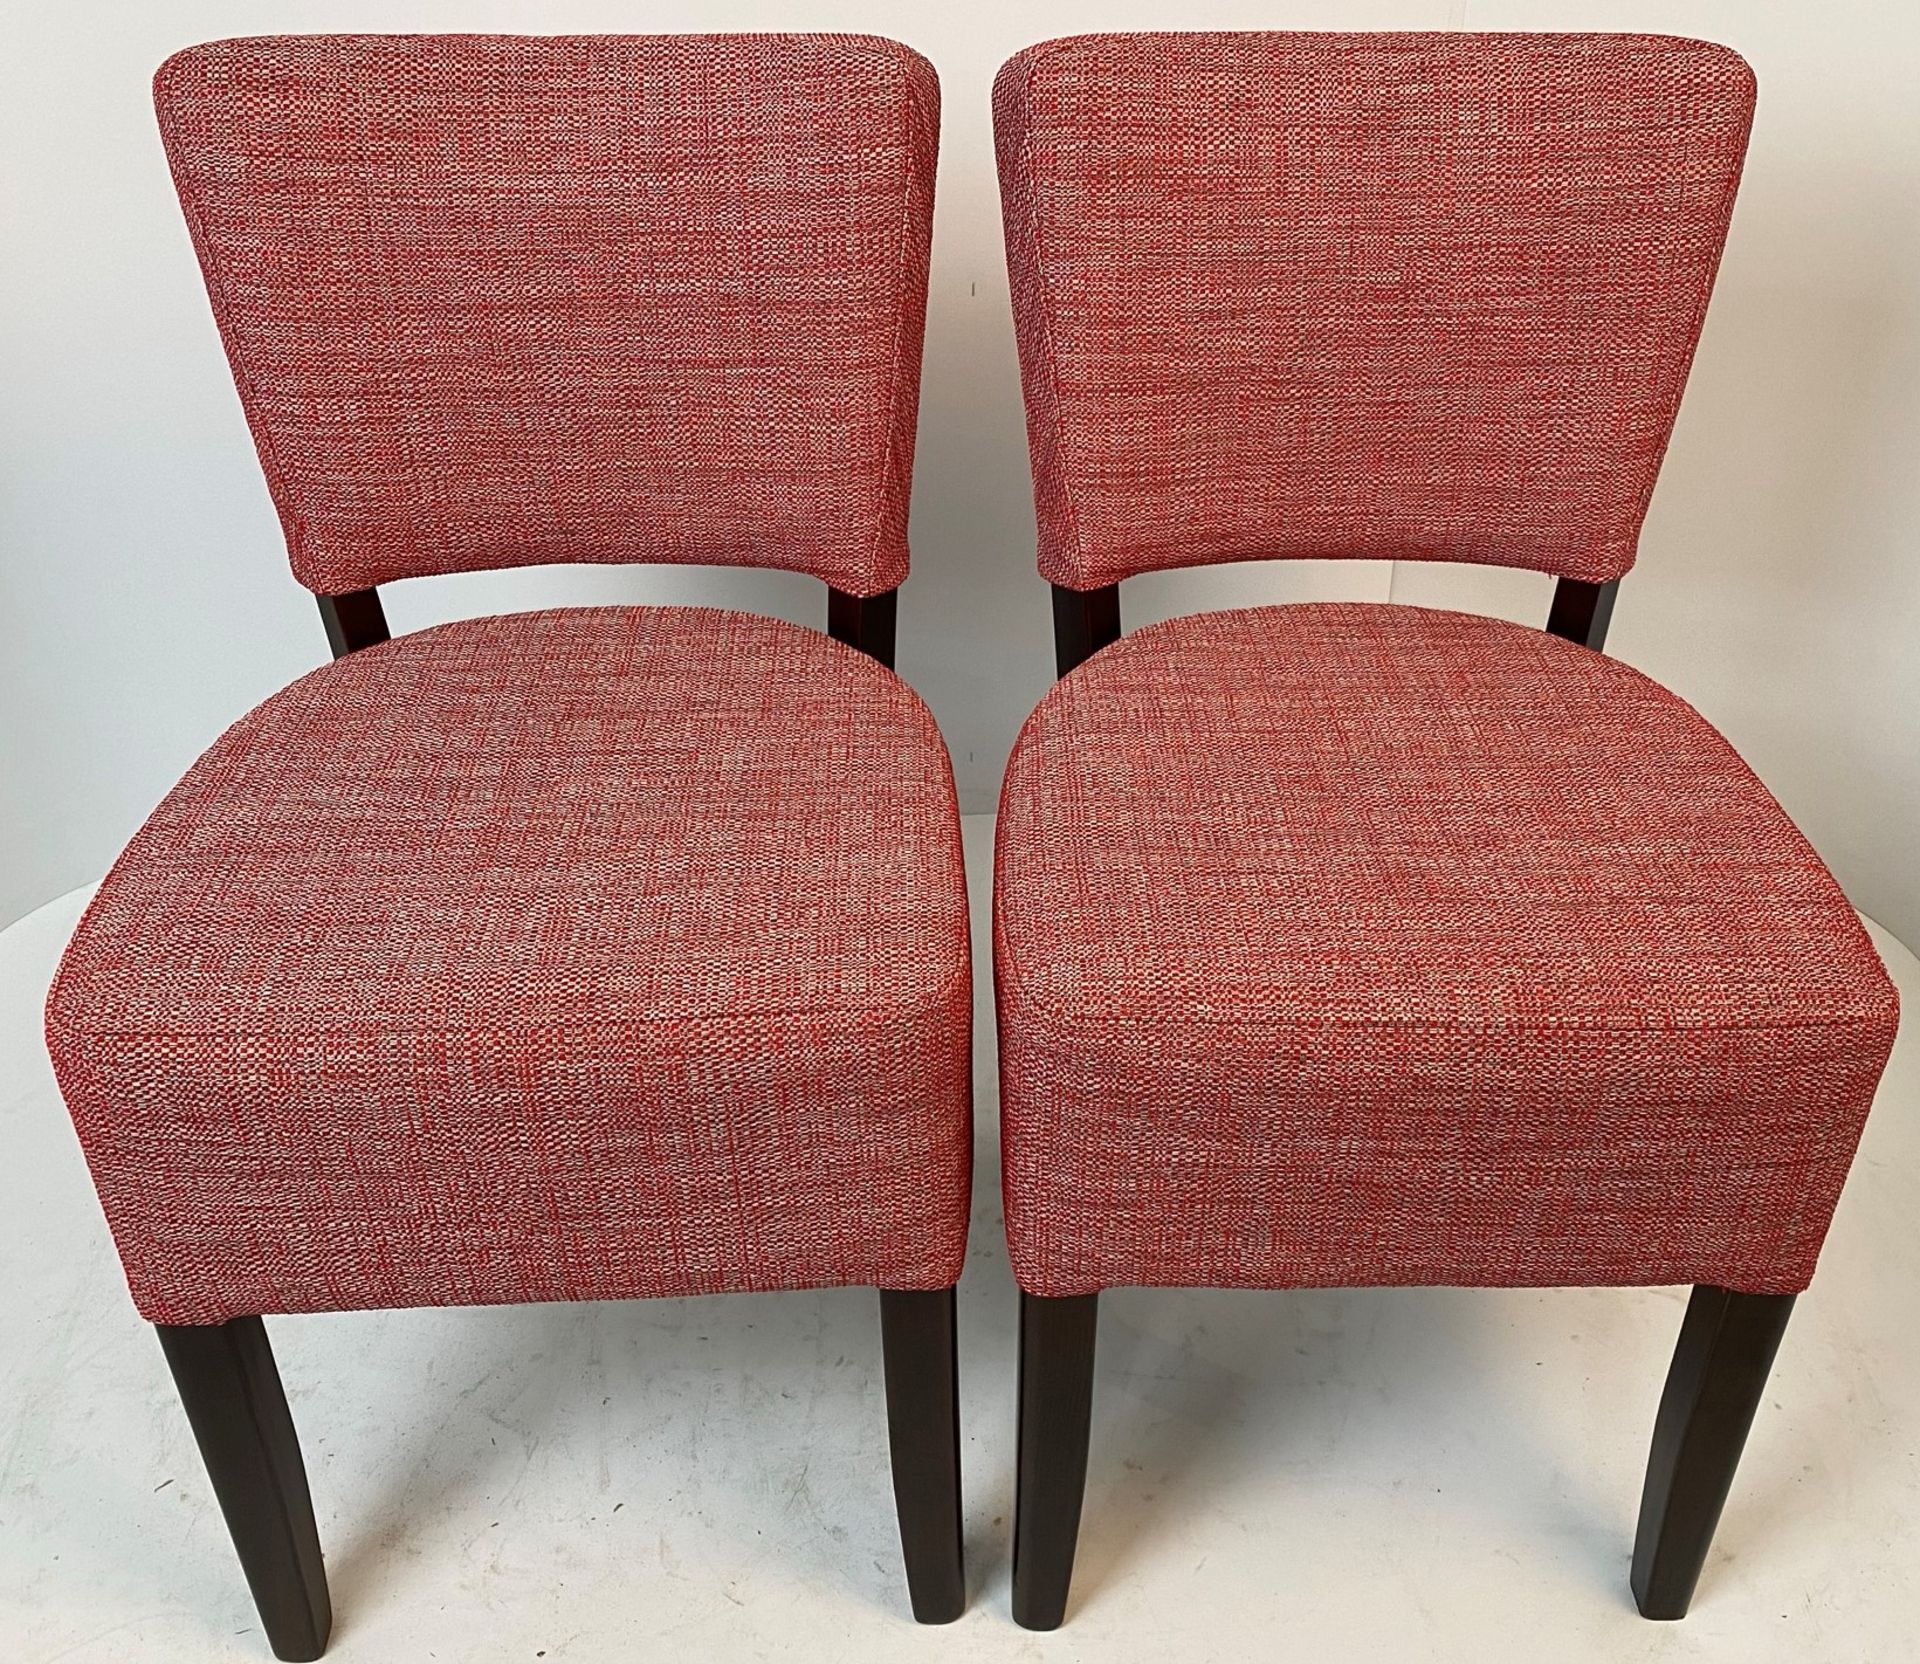 2 x Memphis Sekers Byblos 17 Garnet side/dining chairs with walnut coloured frames